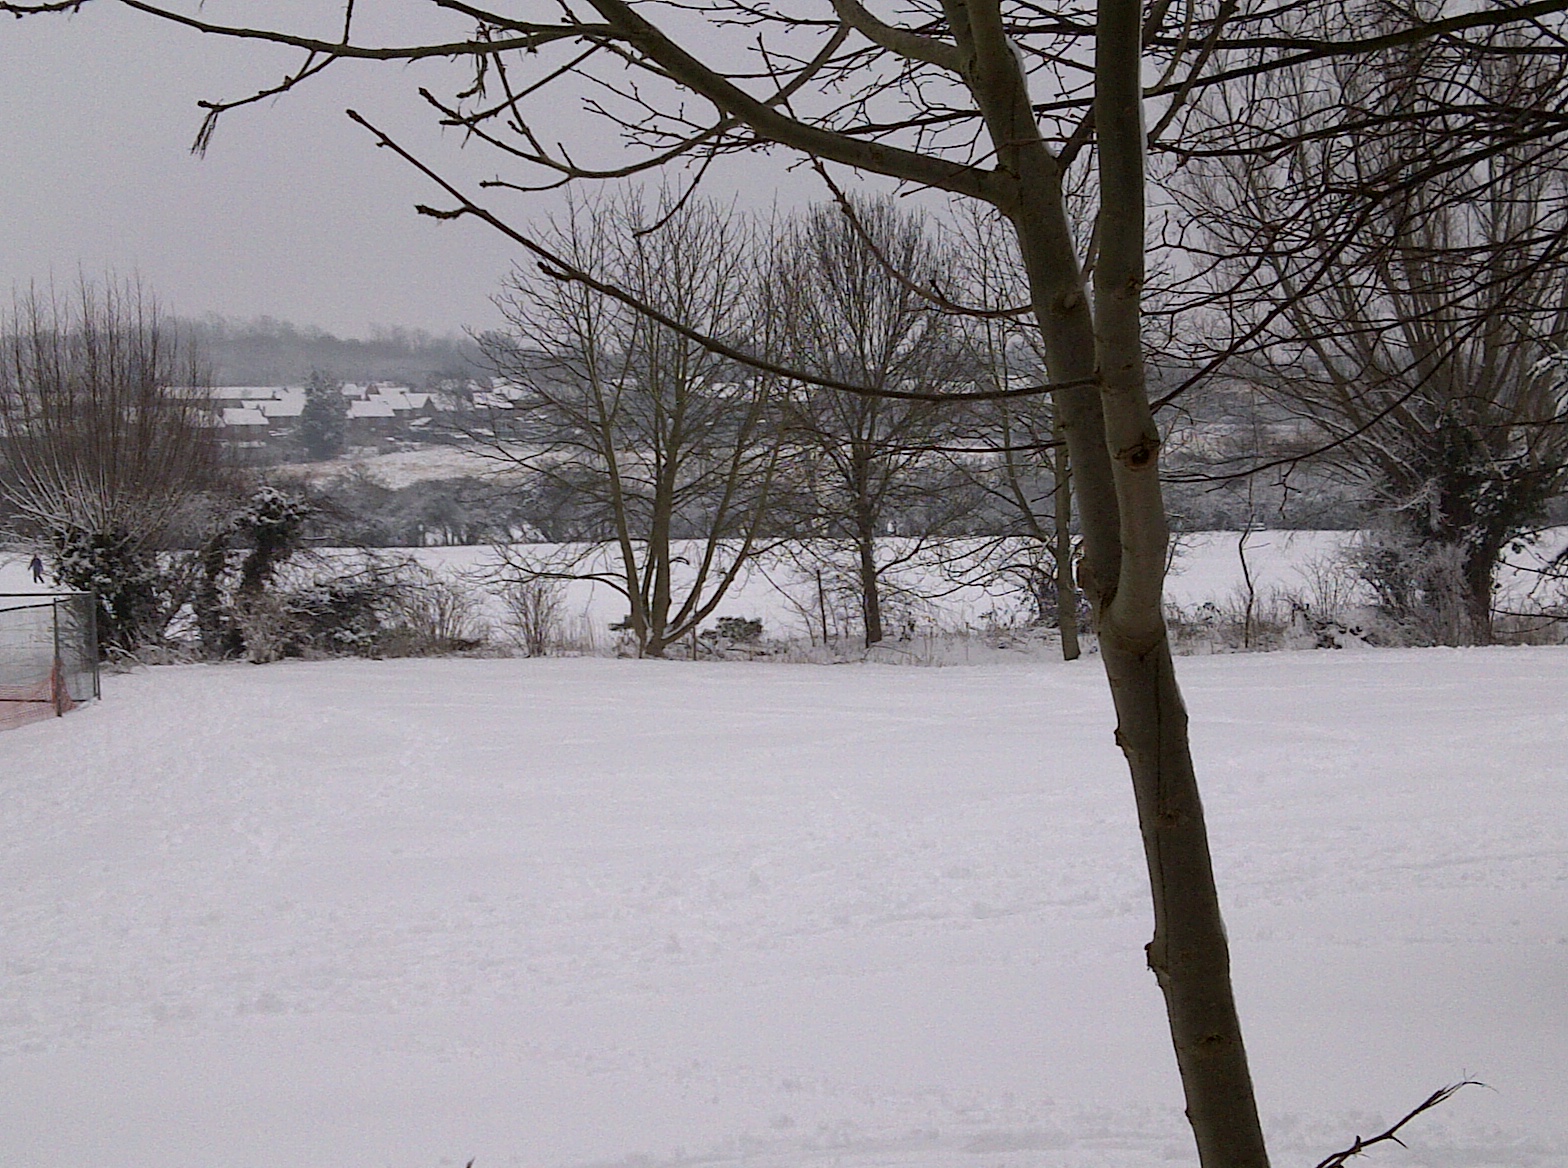 Overlooking Merks Hall and Stebbing, from The Causeway, Great Dunmow, February 2012